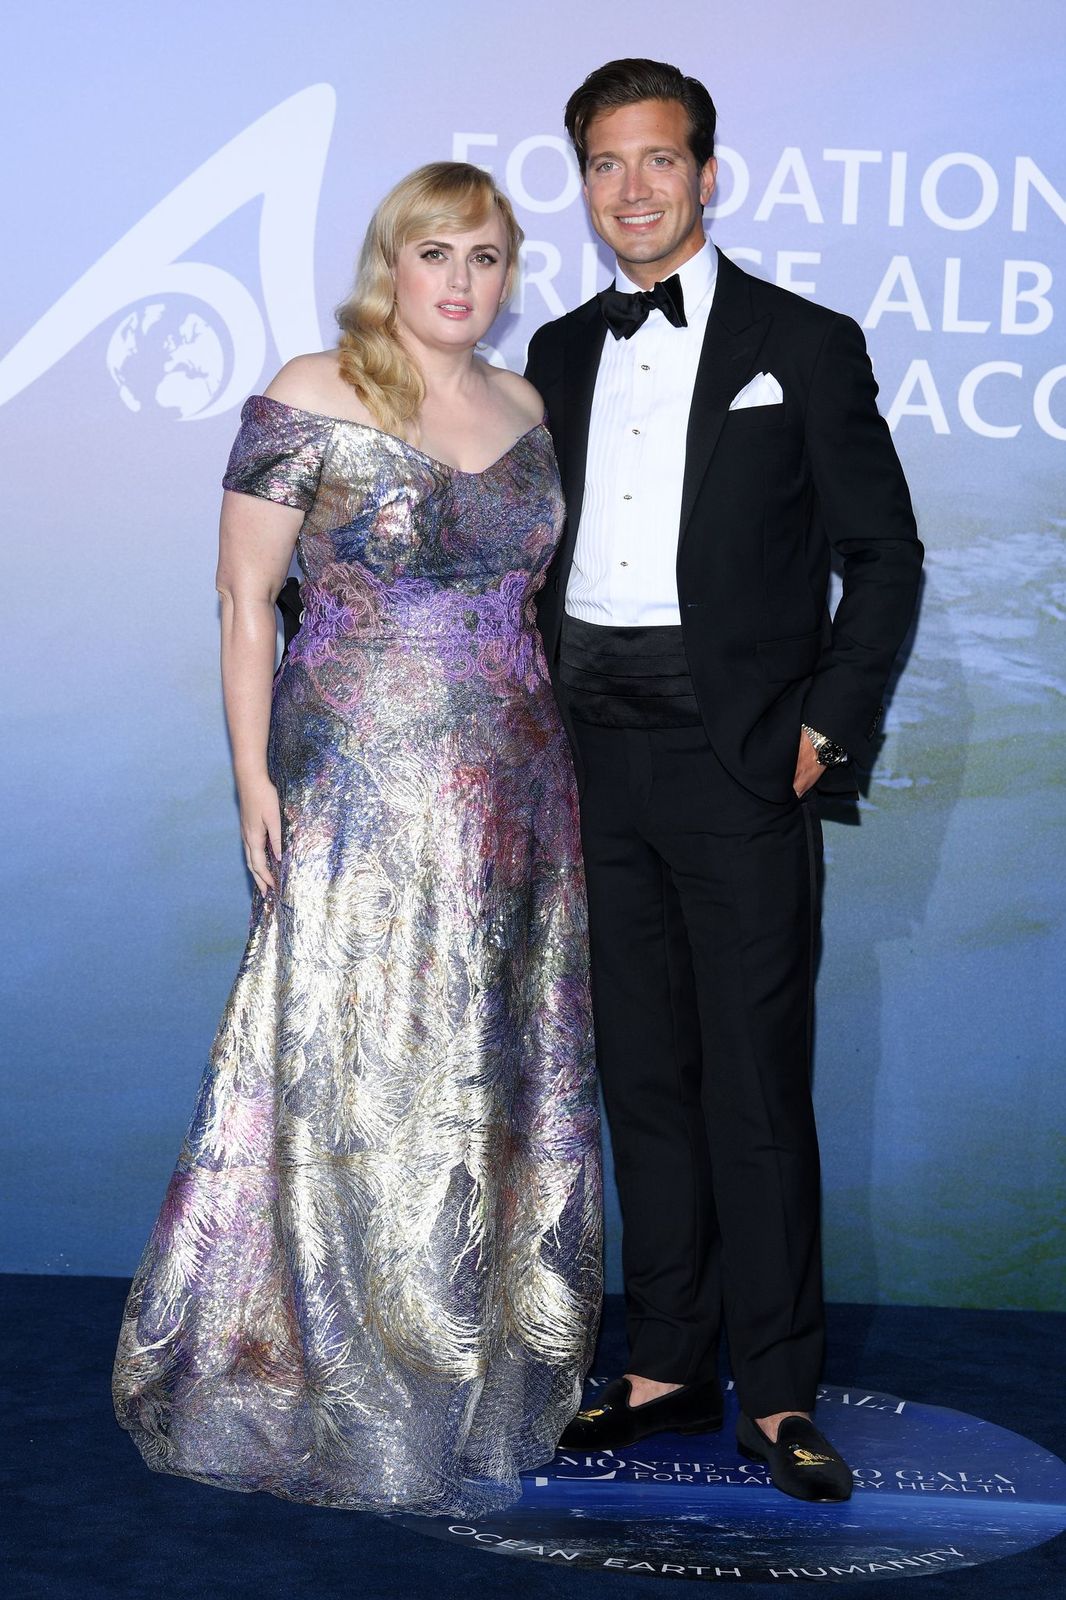 Rebel Wilson and Jacob Busch at the Monte-Carlo Gala For Planetary Health on September 24, 2020, in Monaco | Photo: Pascal Le Segretain/Getty Images